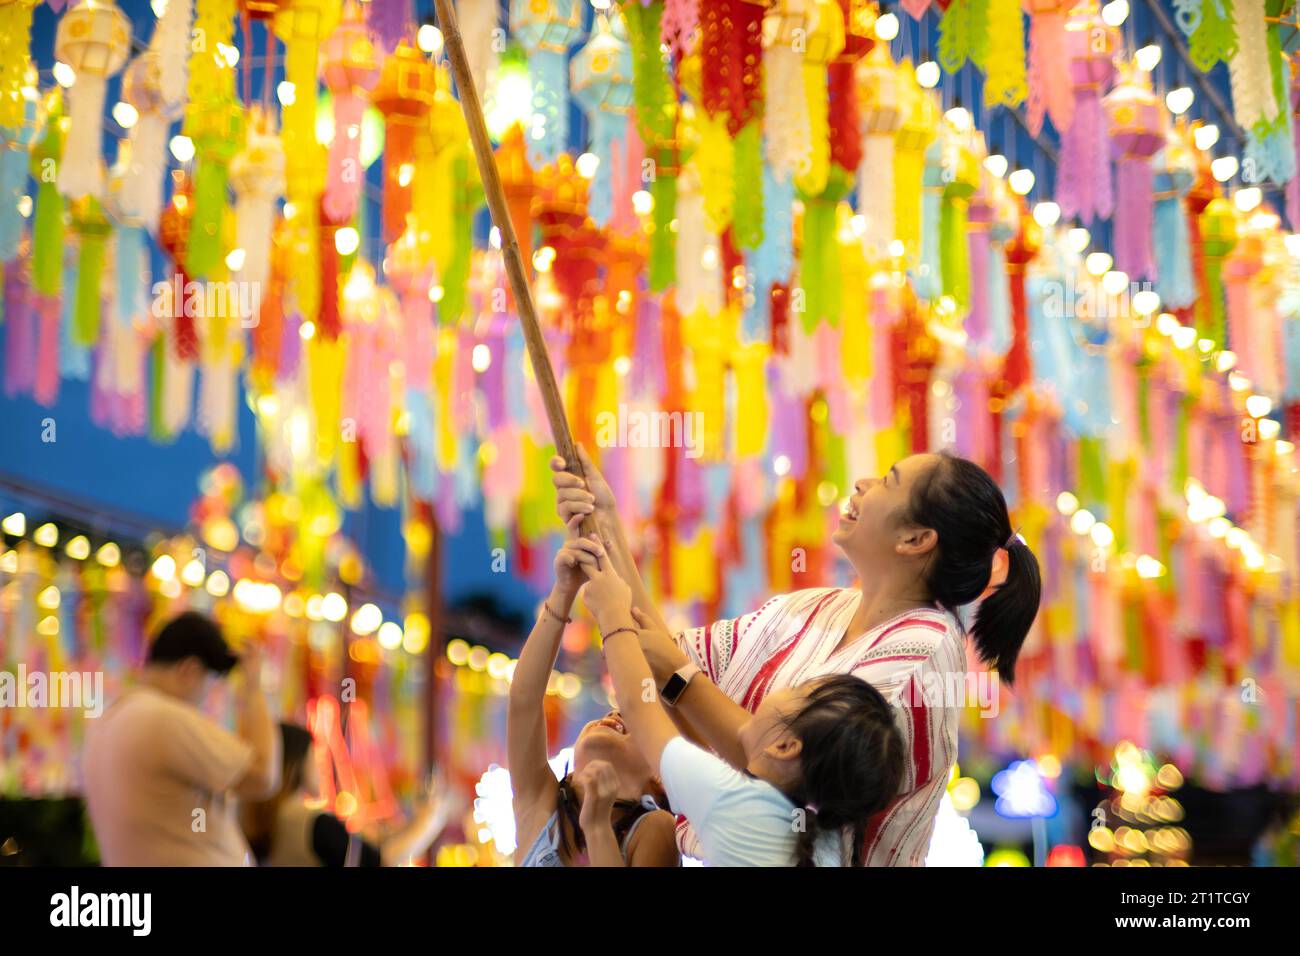 Asian families make wishes and hang lanterns during The Hundred Thousand Lantern Festival or Yi Peng Festival in northern Thailand. Stock Photo